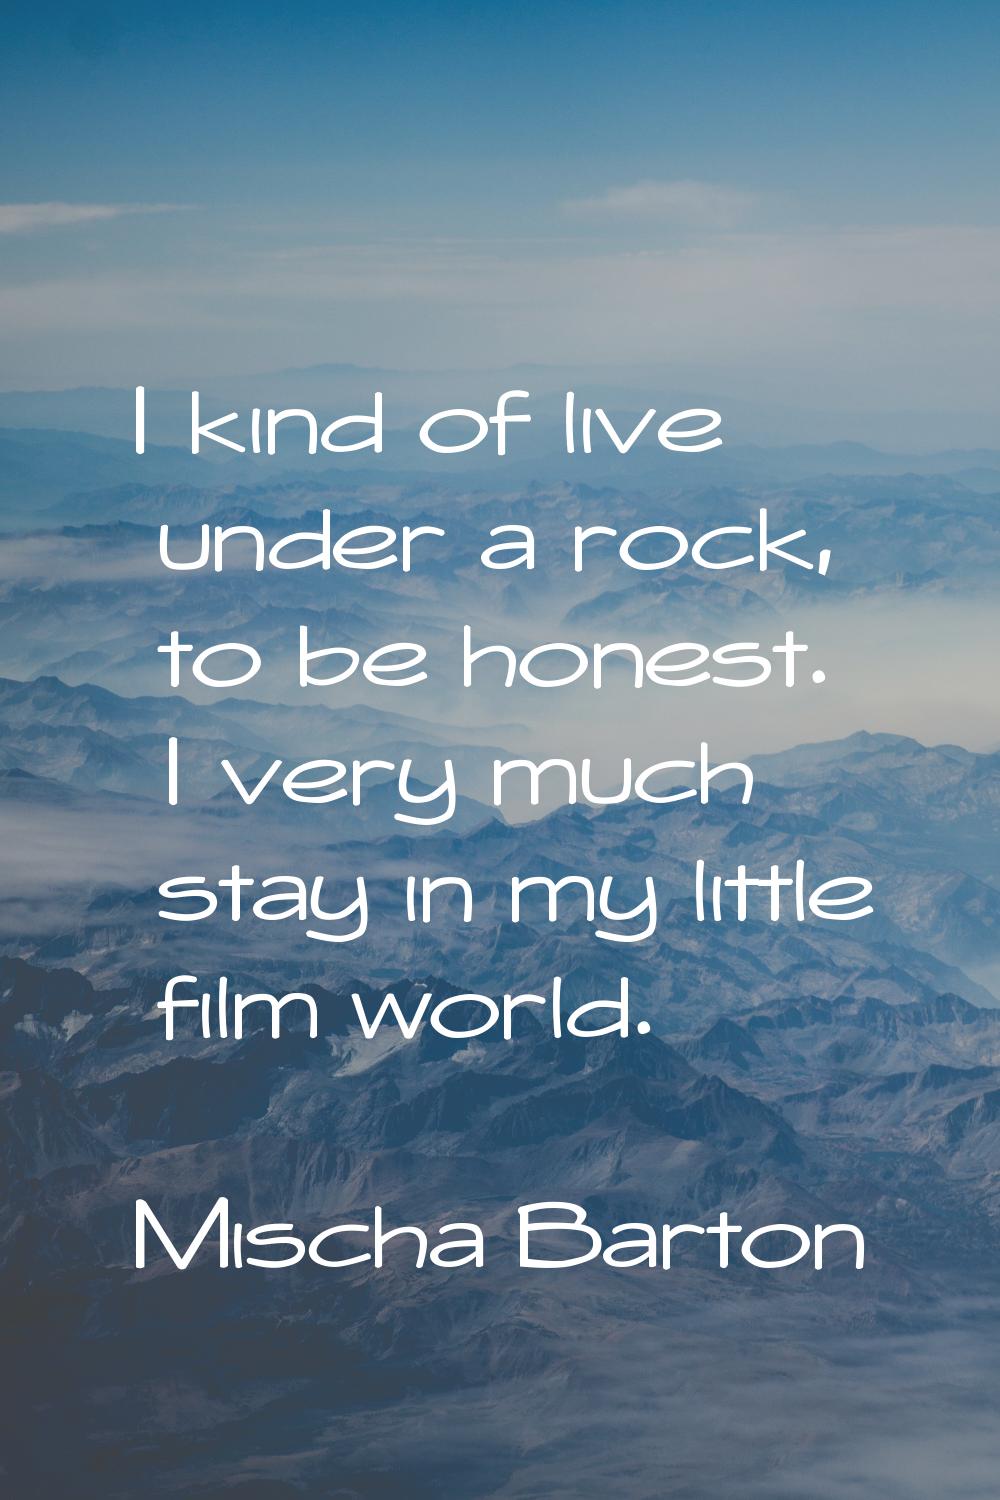 I kind of live under a rock, to be honest. I very much stay in my little film world.